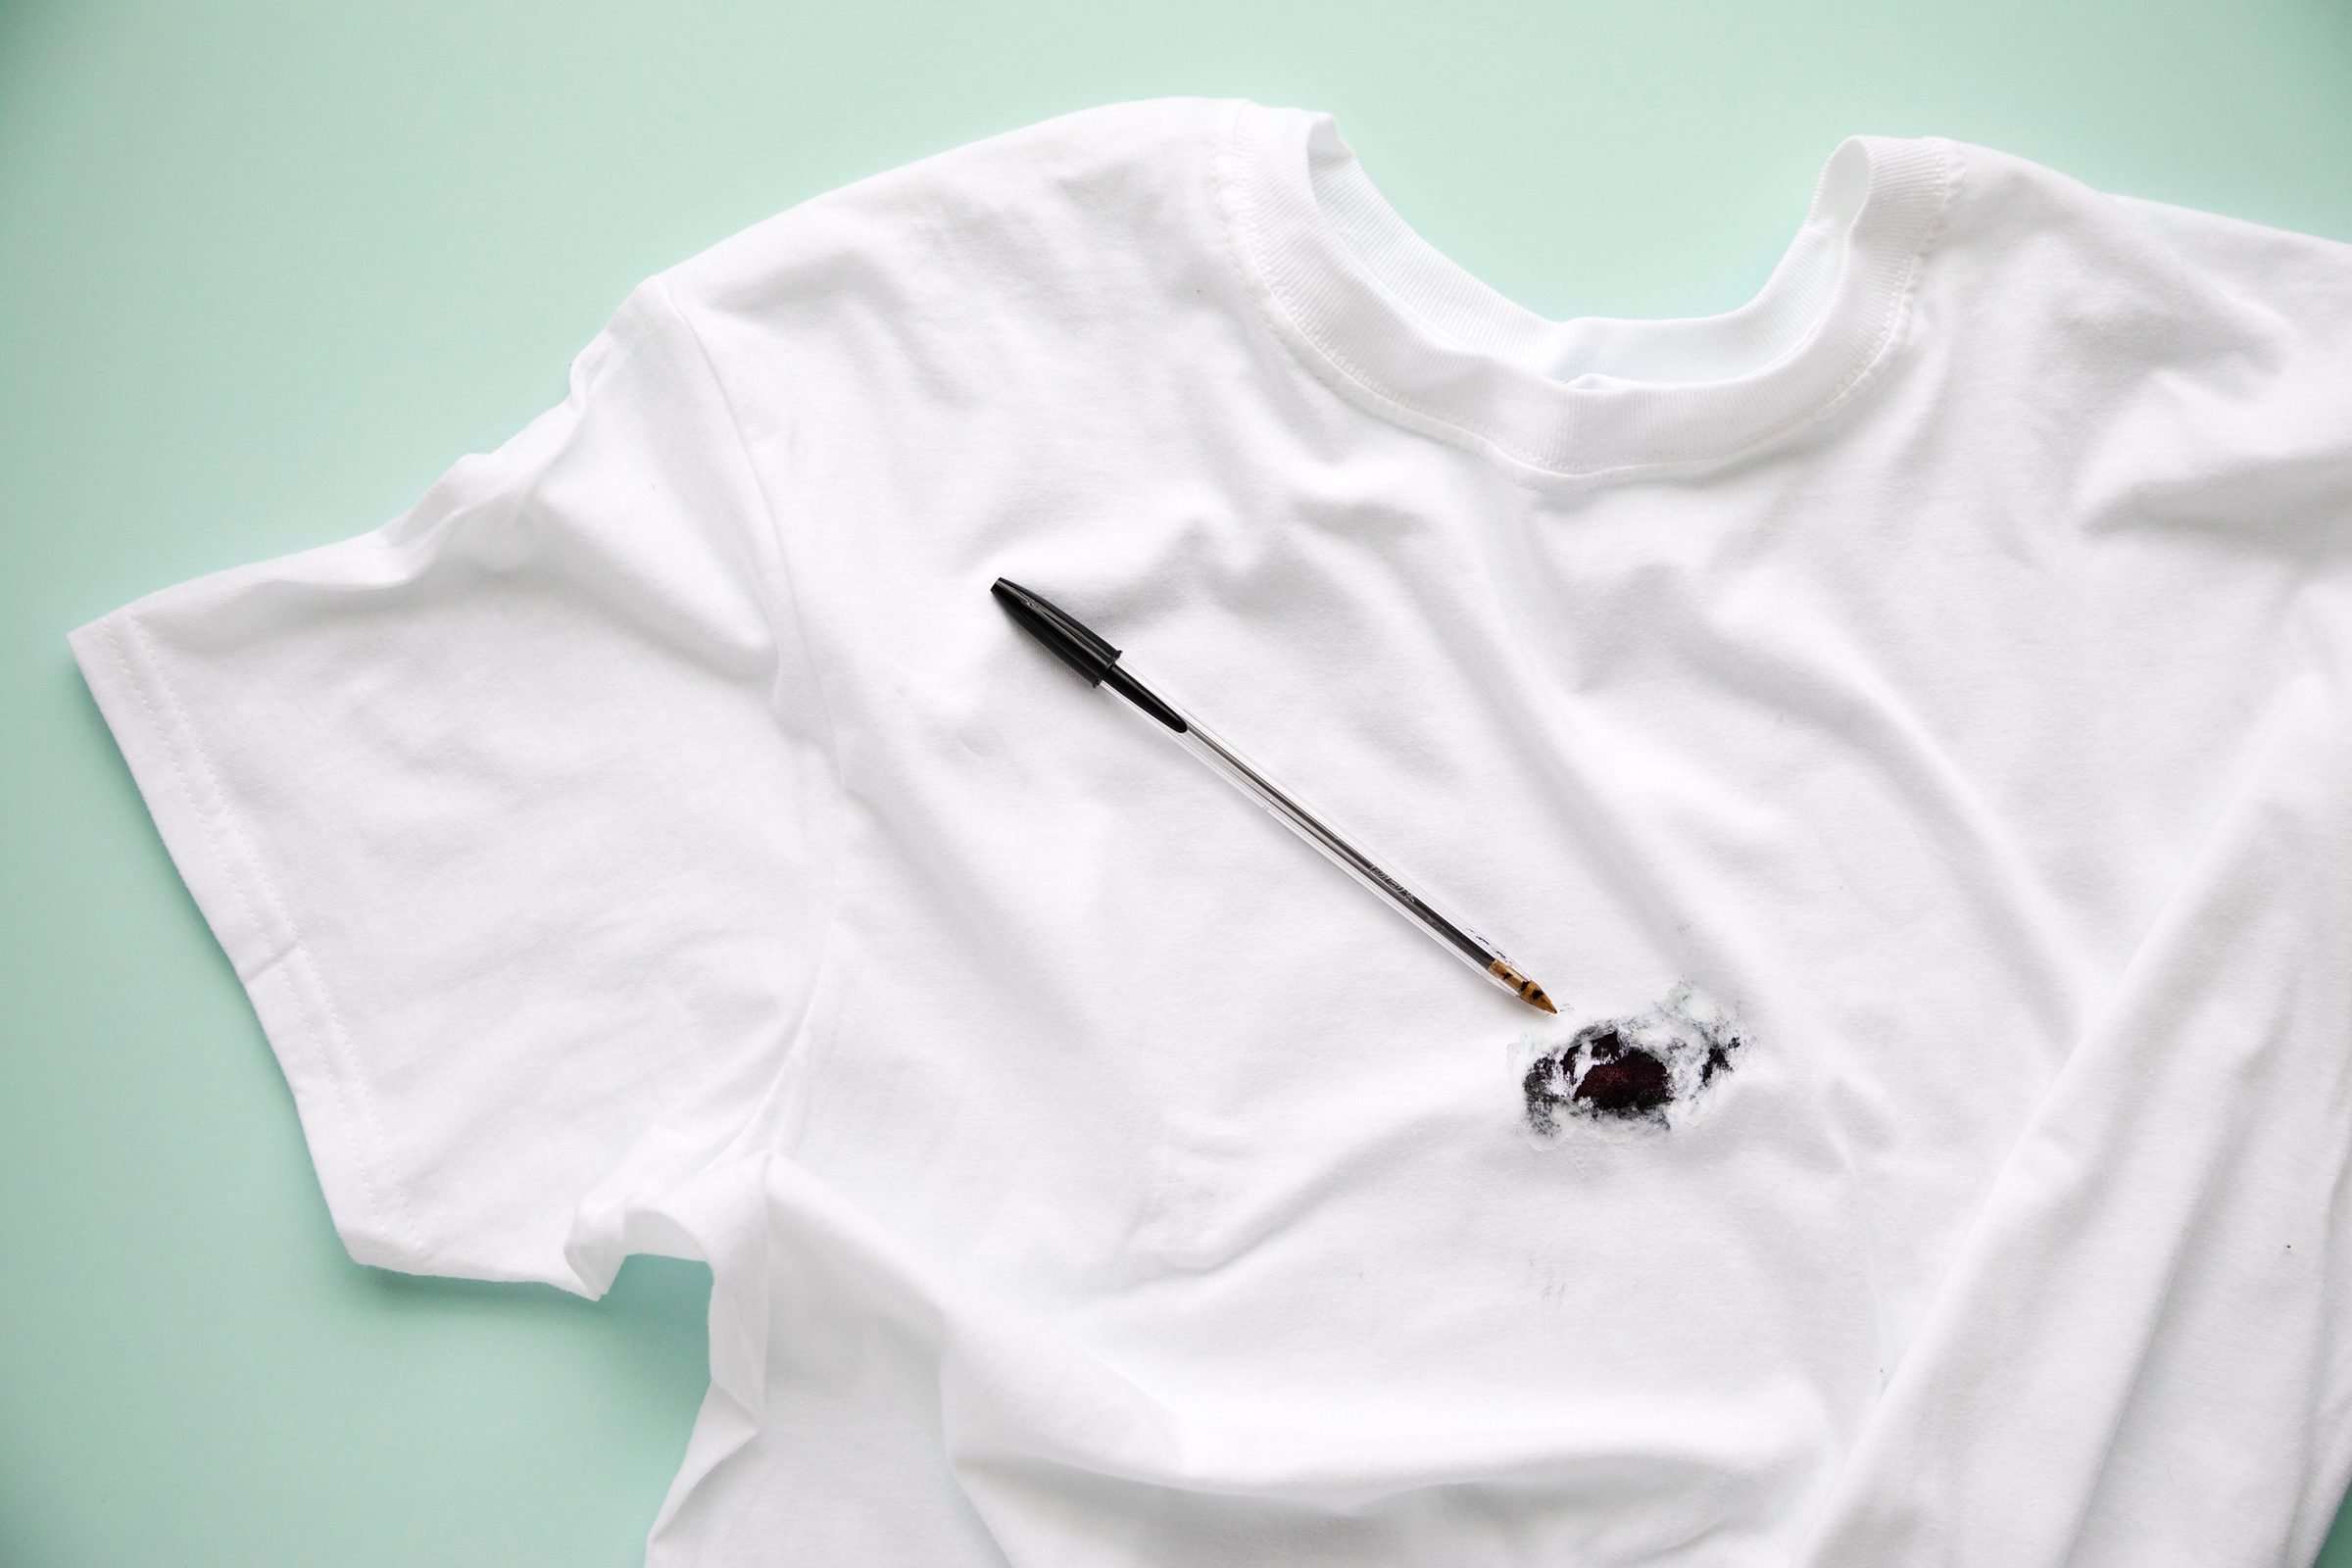 How to Remove Ink from Clothes: The 8 Best Cleaners